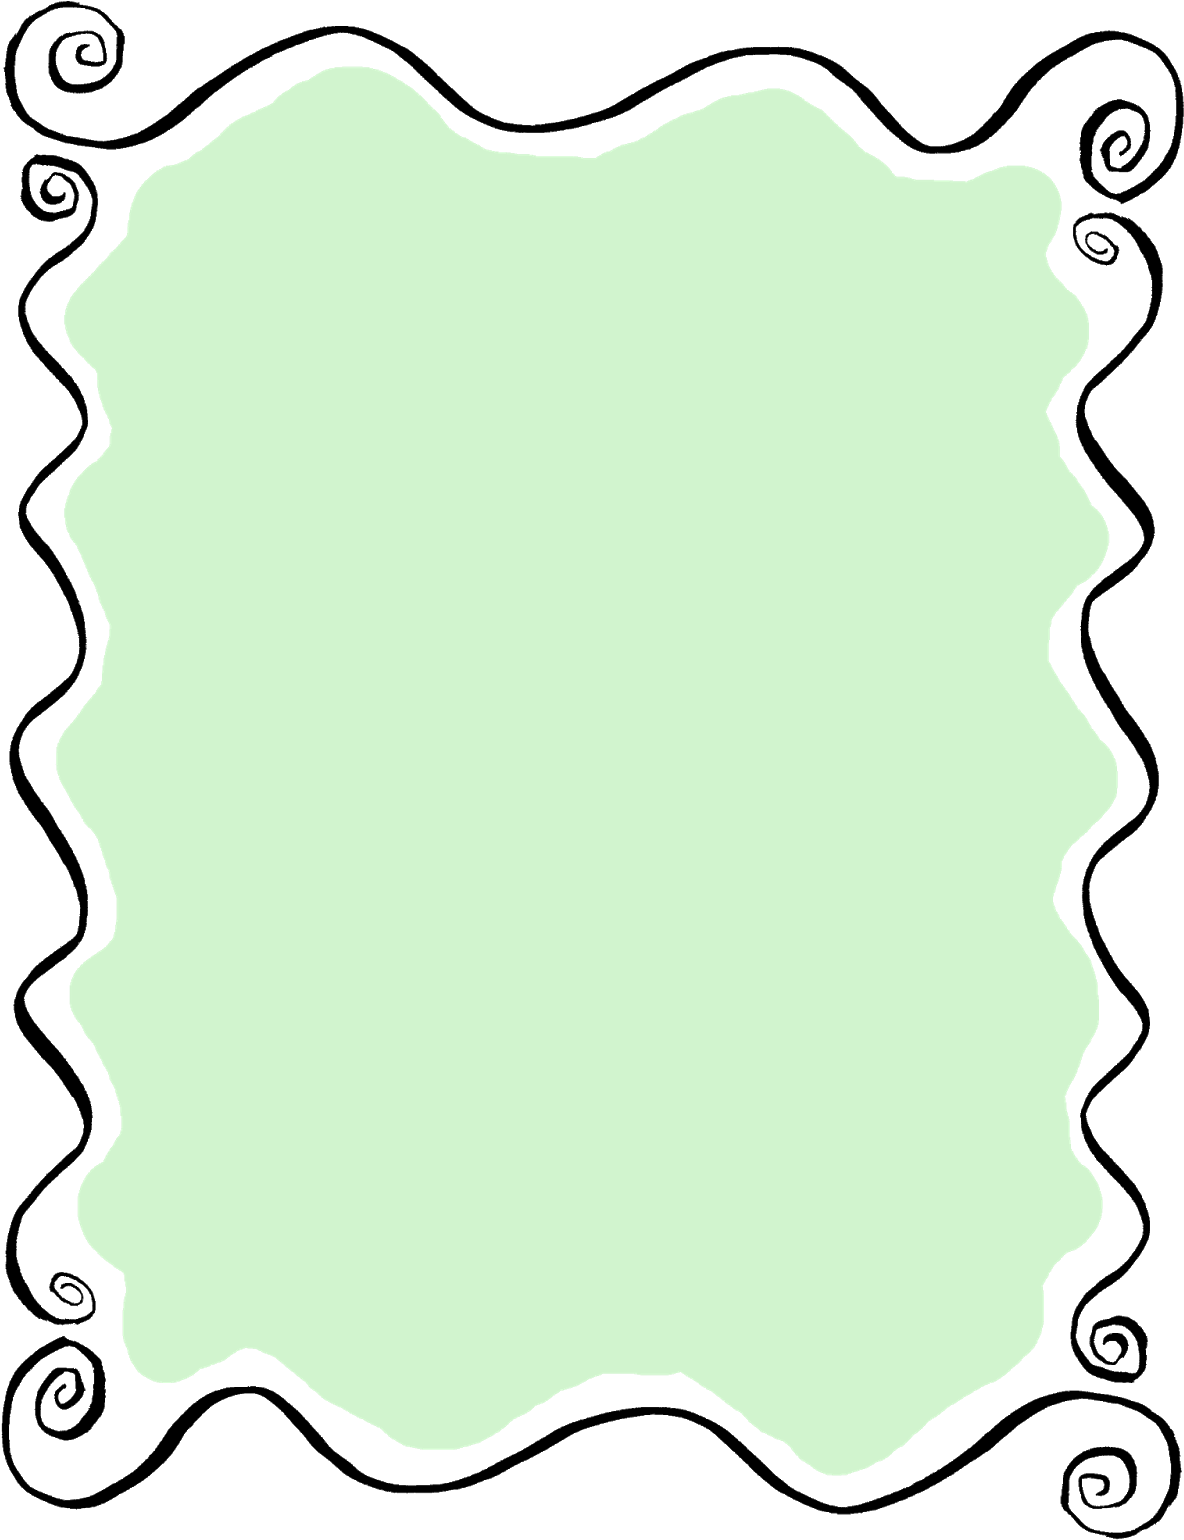 A Green Rectangle With Black Border